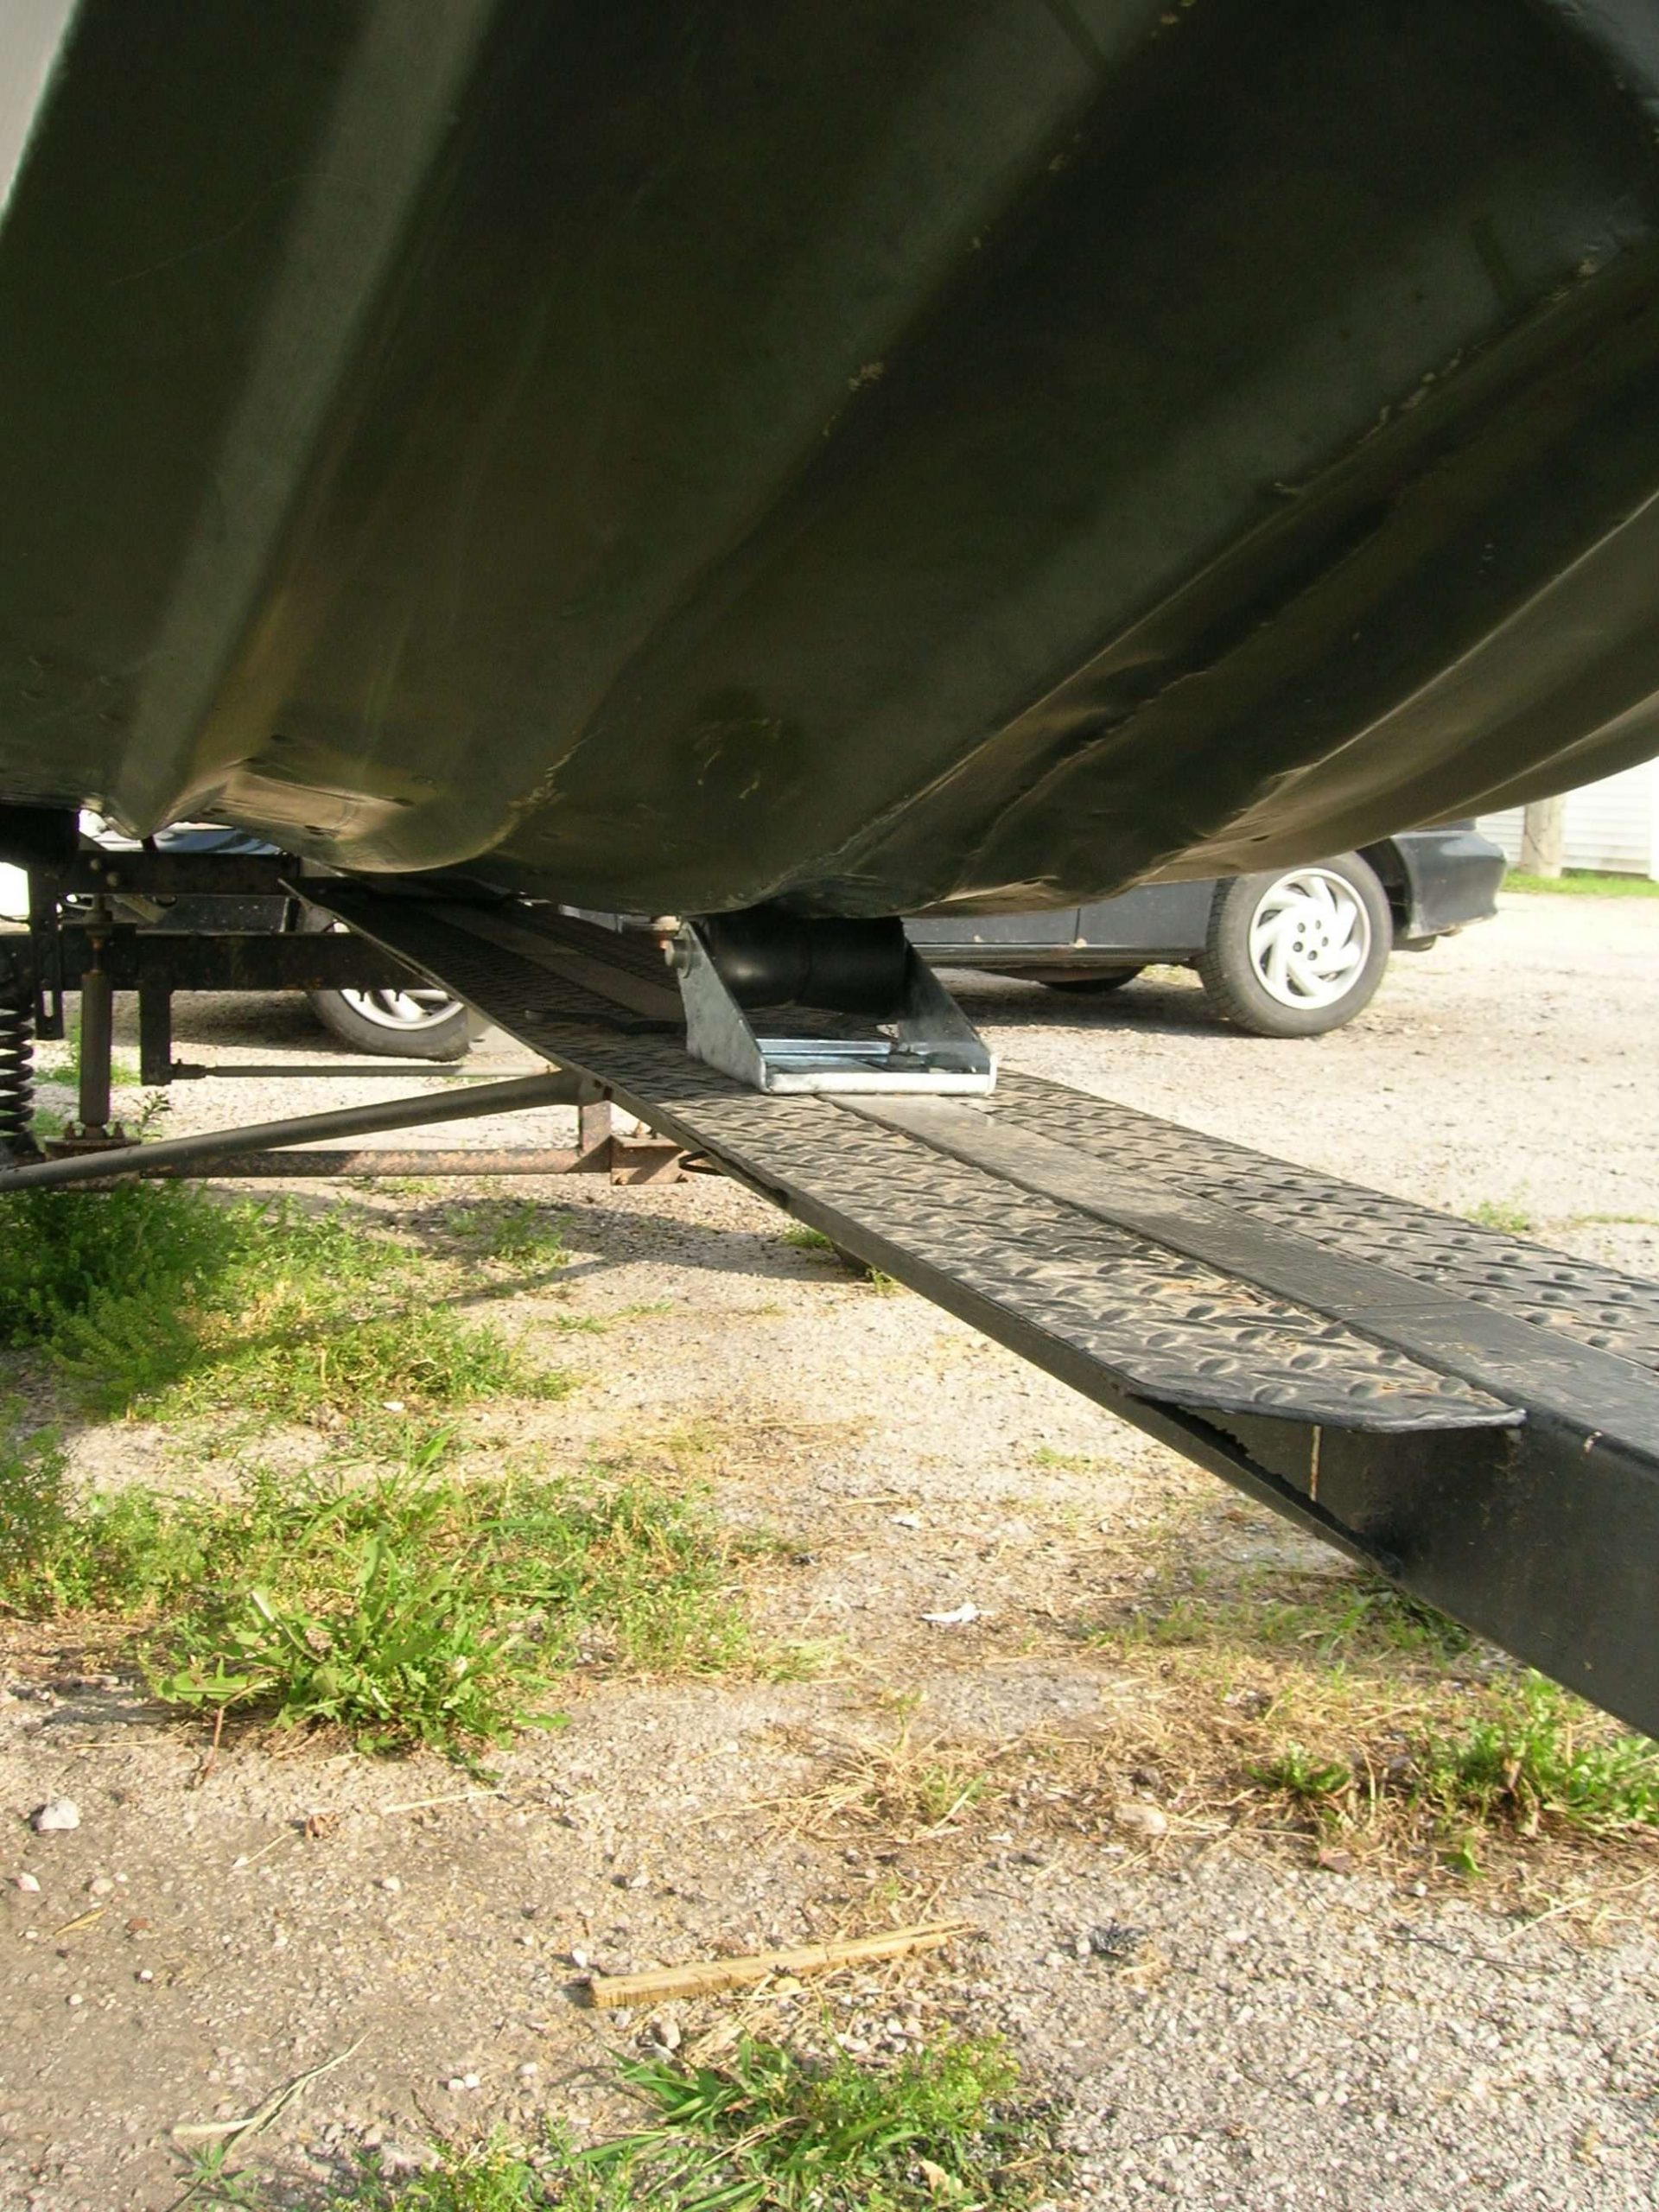 Now, let's get into some modifications: I replaced that roller at the first boat ramp I visited. I think the front of the boat had sustained some damage at some point in its life, and was welded. I couldn't be sure, but it was a $200 boat. It never leaked a drop.